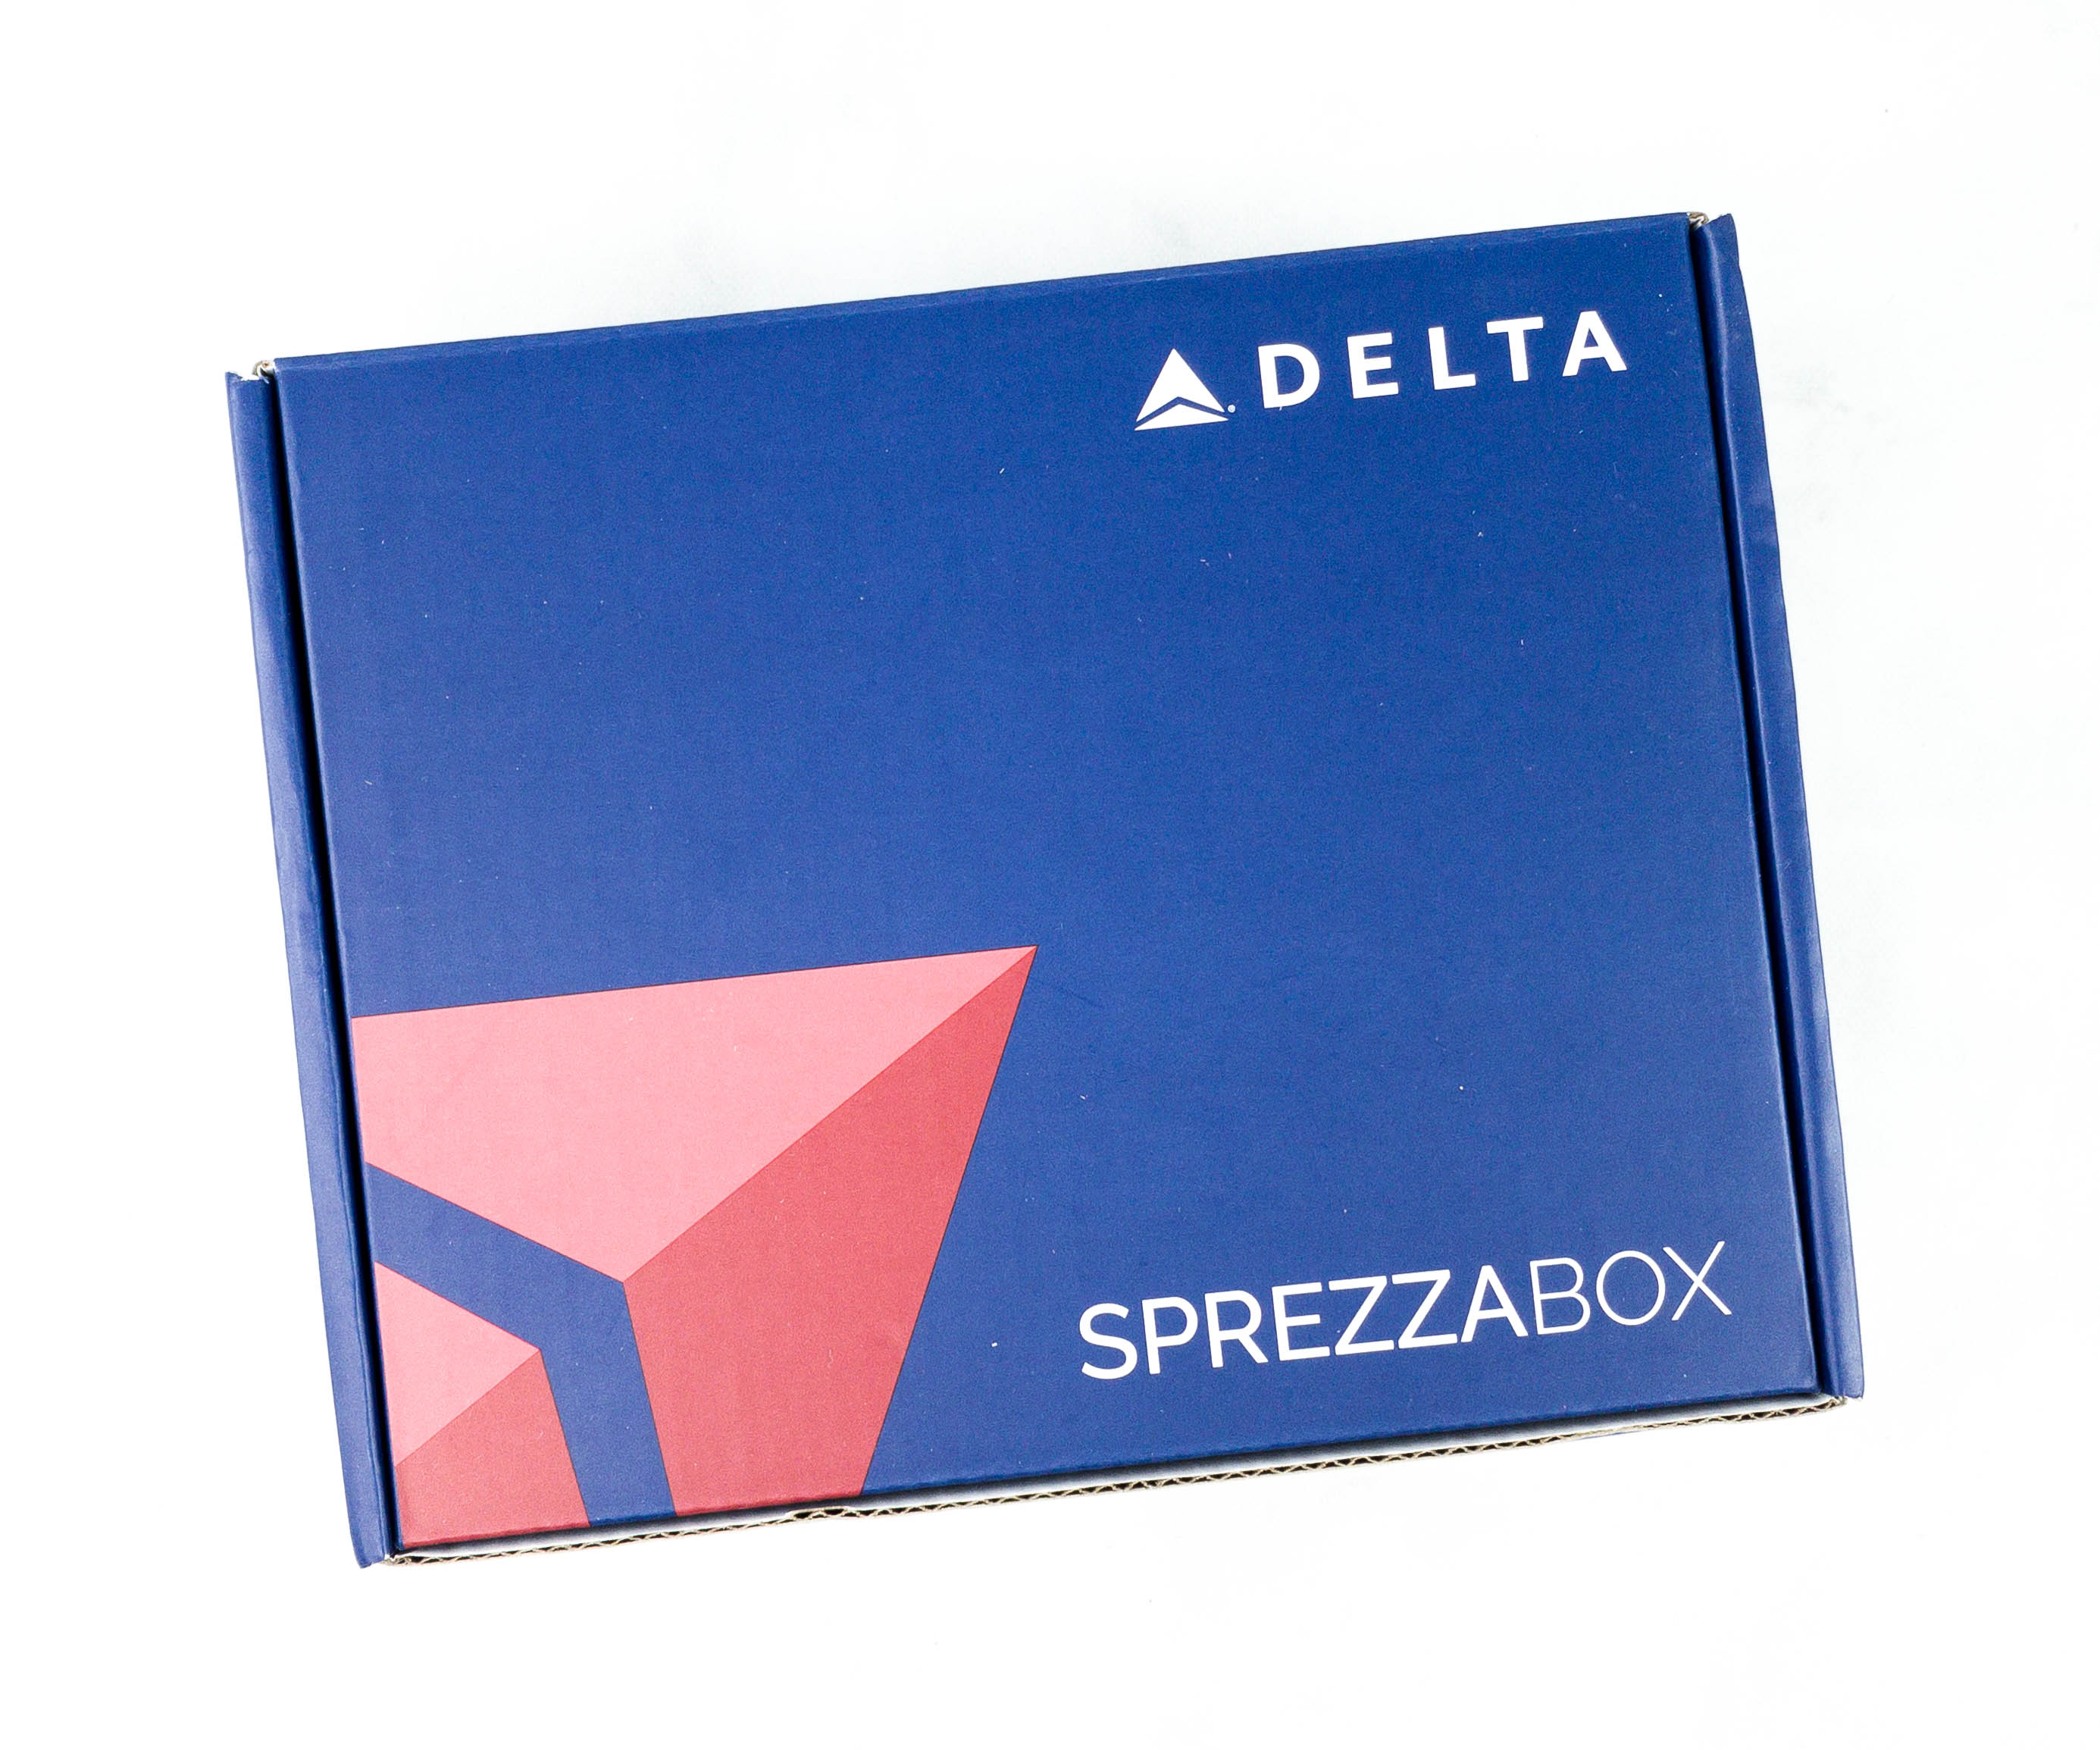 Delta Airlines Congrats $100 Gift Card (email Delivery) : Target